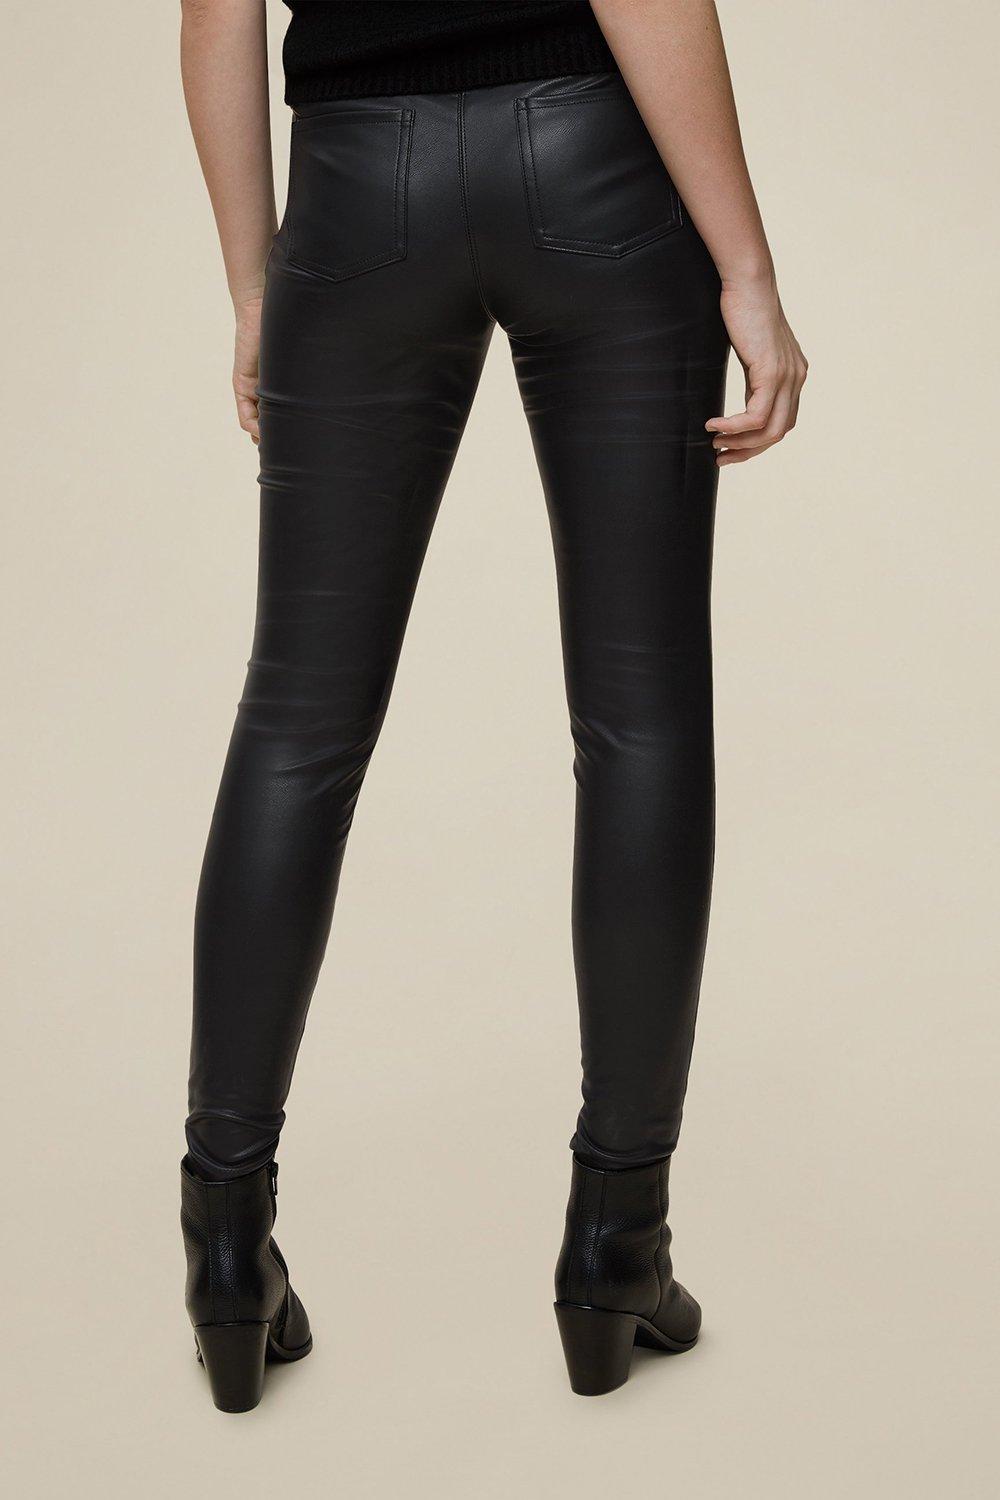 dorothy leather look jeans for Sale OFF